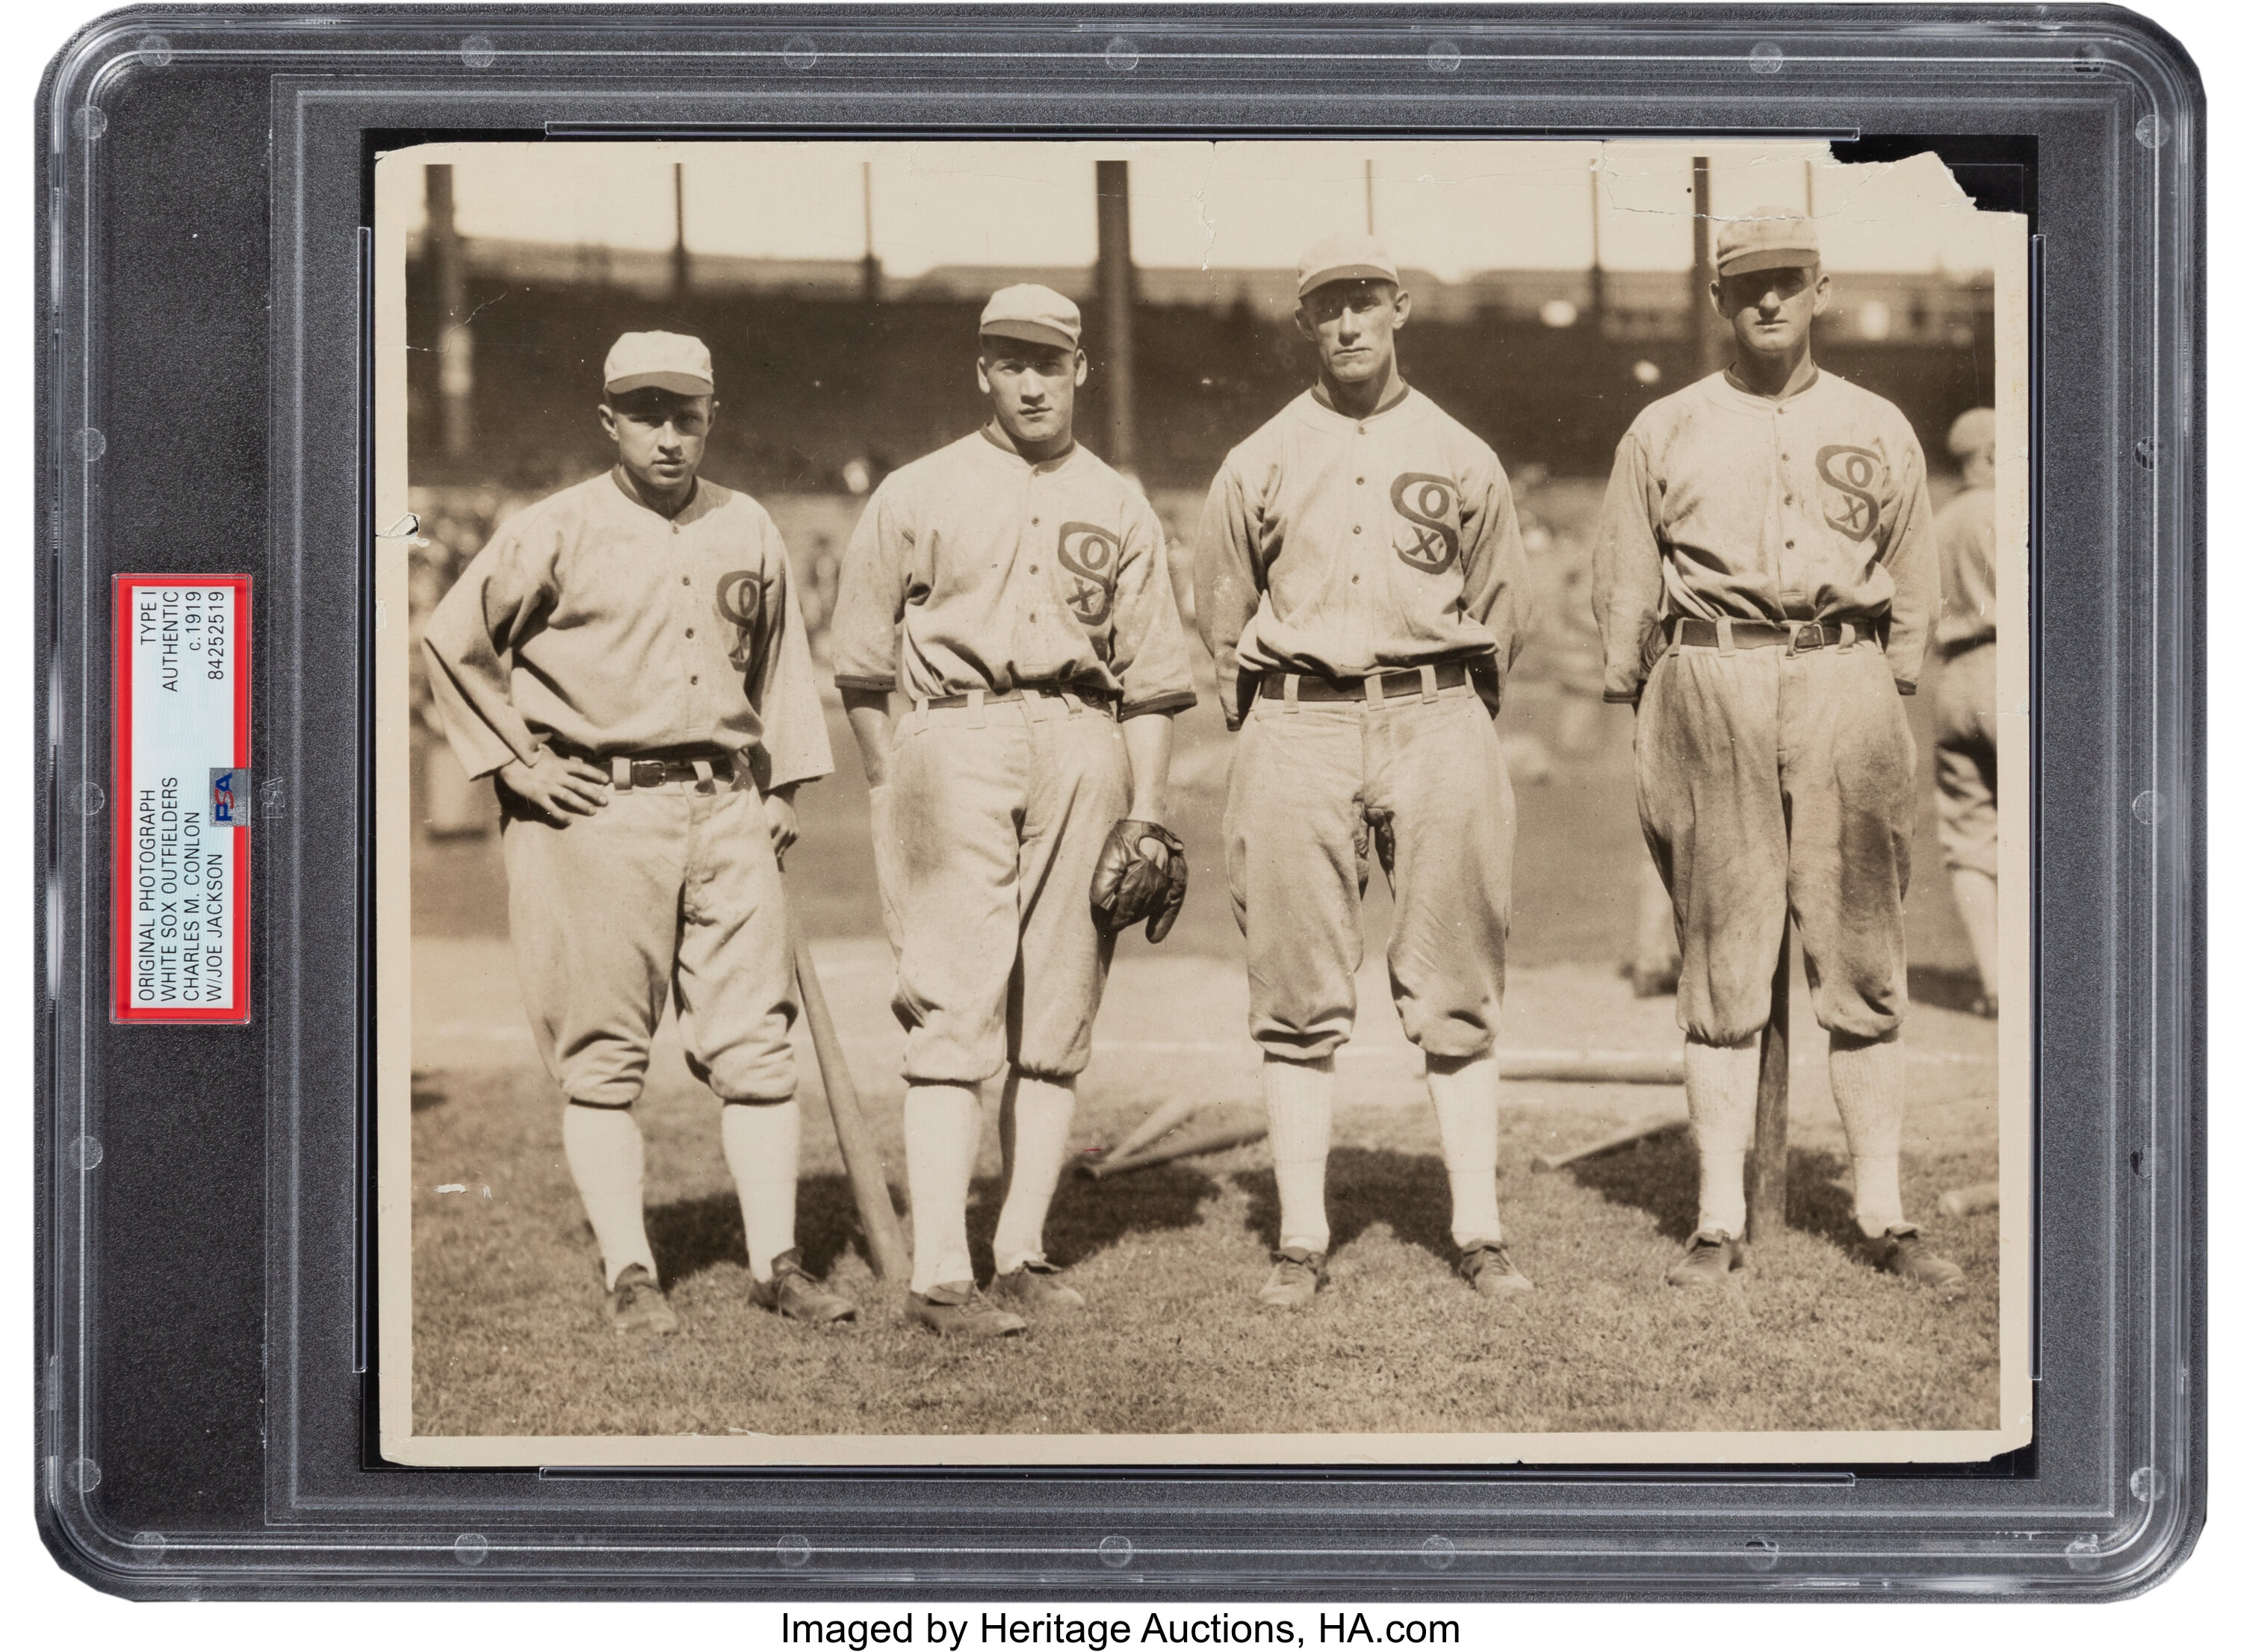 How GOOD were the 1919 White Sox? 